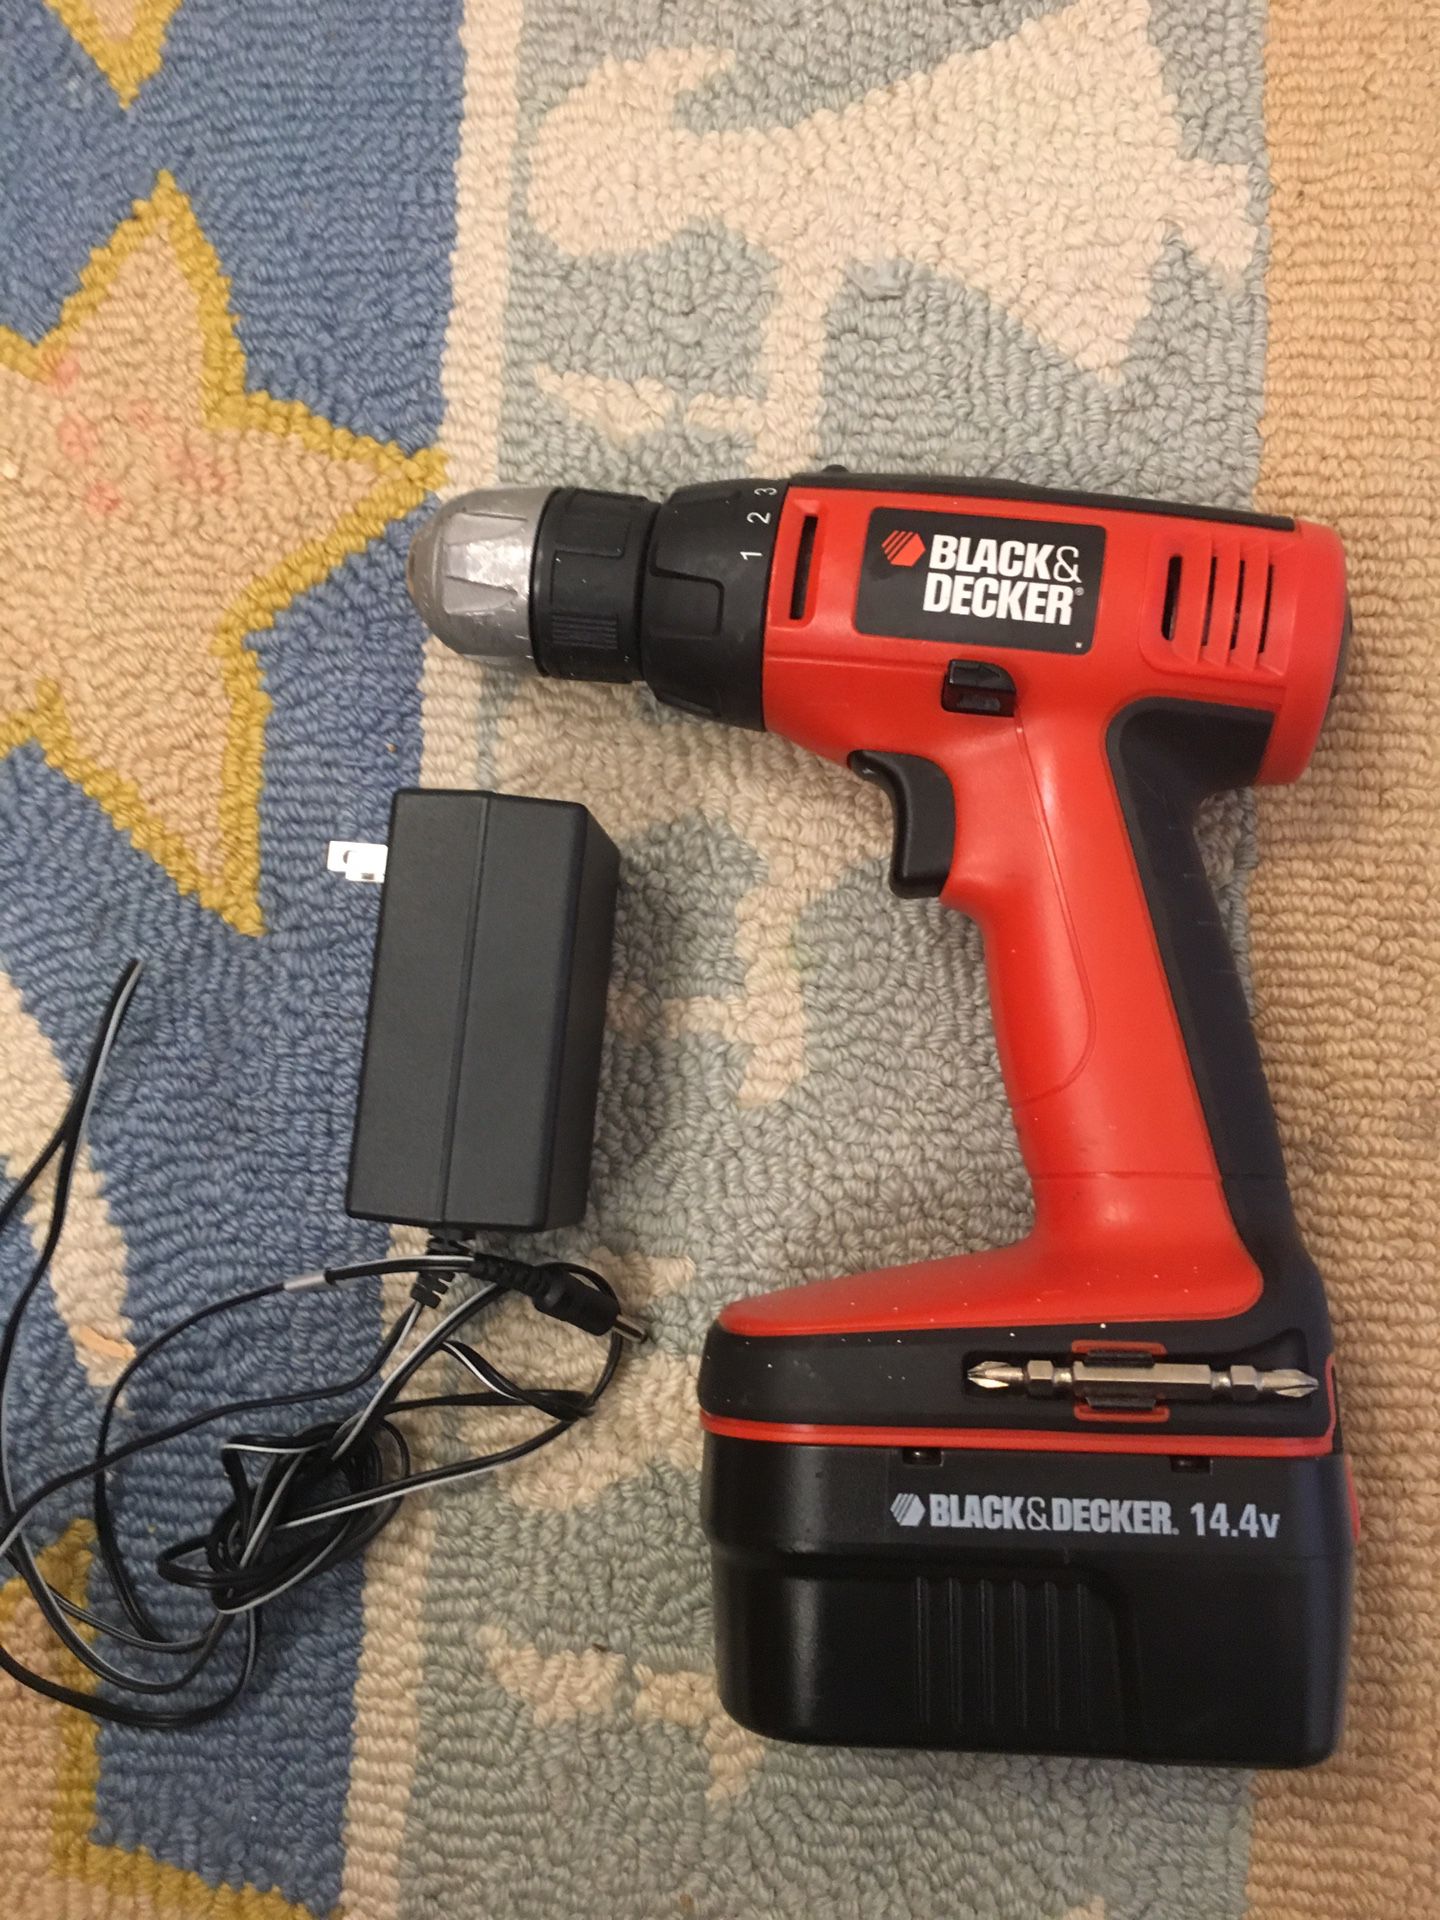 Black & Decker 14.4v Cordless Power Tool with Charger